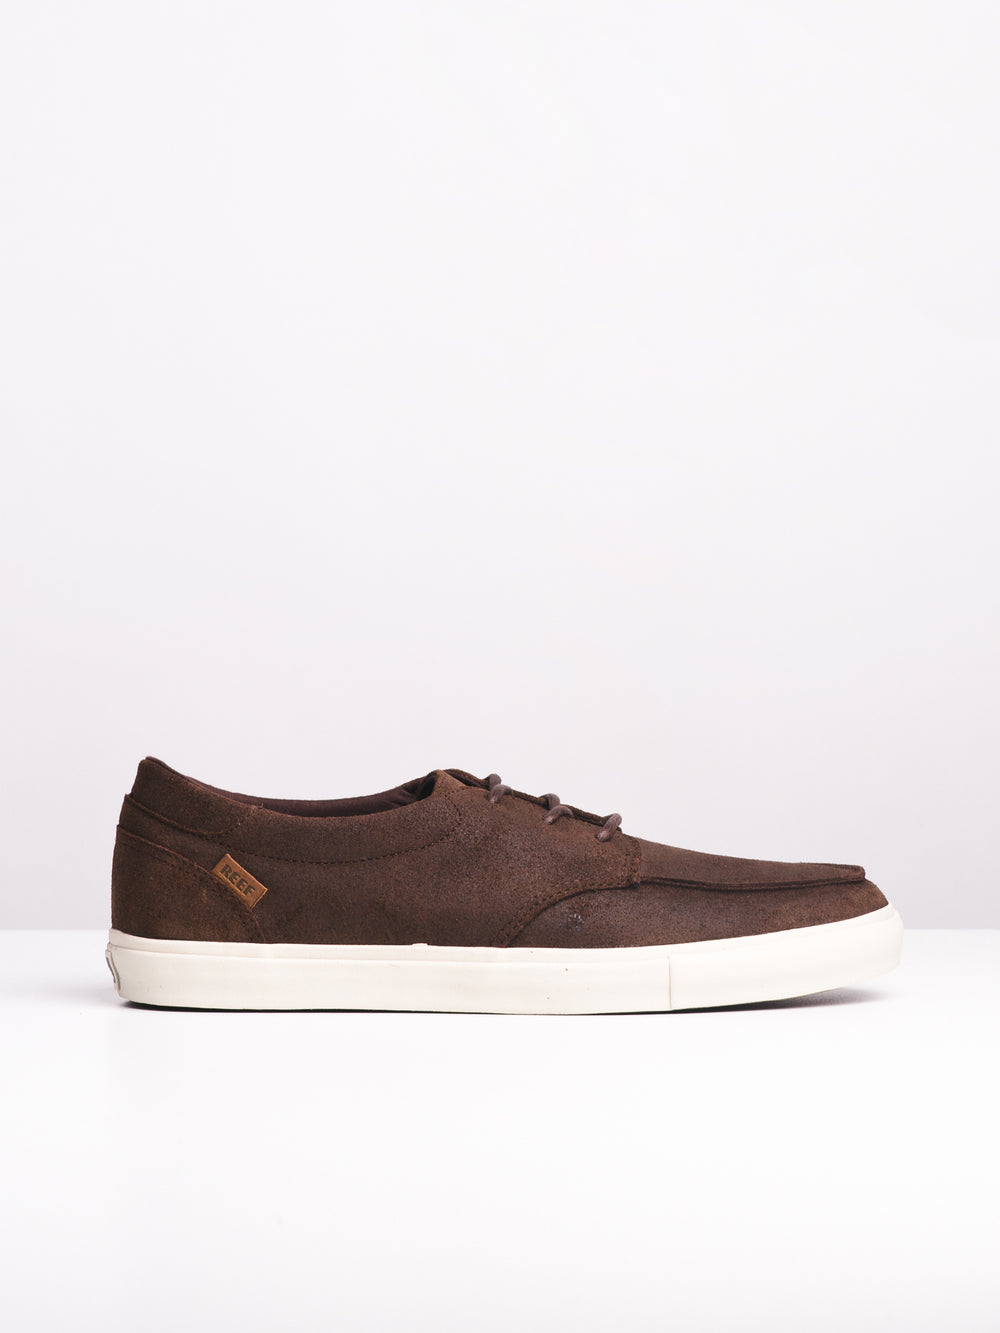 MENS REEF DECKHAND 3 LE - CHOCO - CLEARANCE